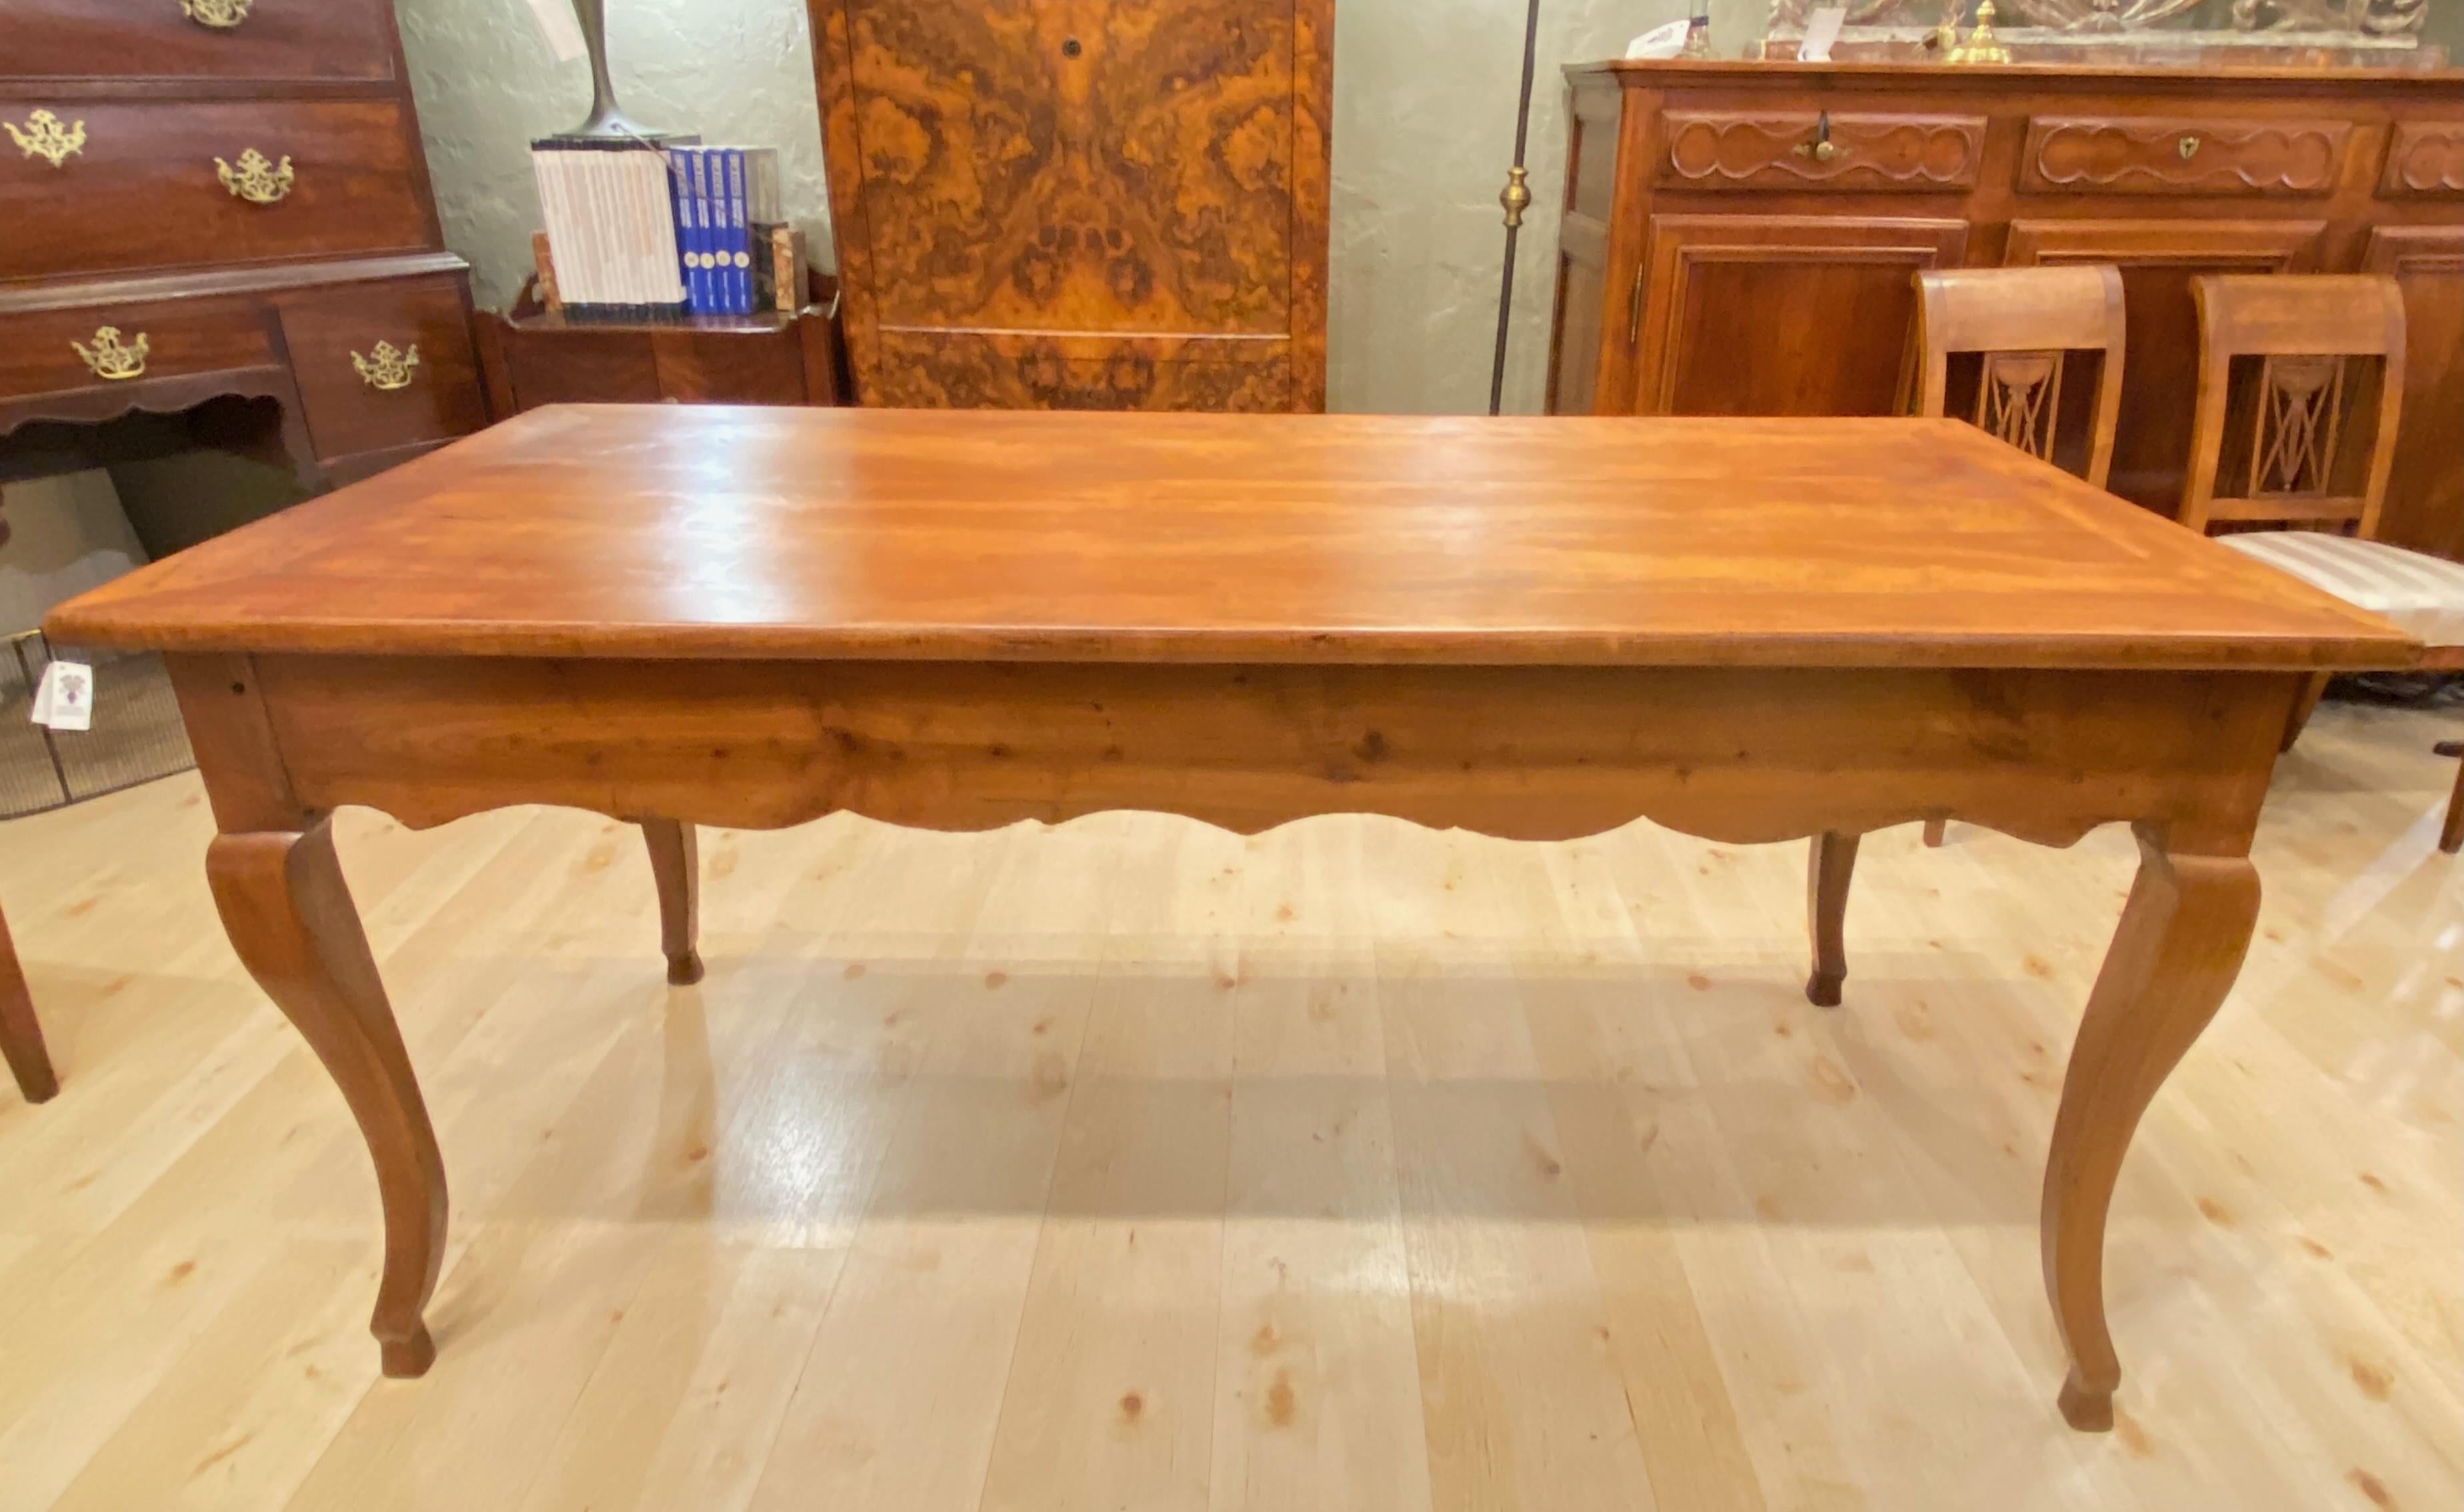 18th Century solid cherrywood dining table. In remarkable antique condition. Beautifully crafted French County style. Having a useful cutlery drawer on each end.
Acquired from a private Hillsborough estate.
Measurement of height from the floor to